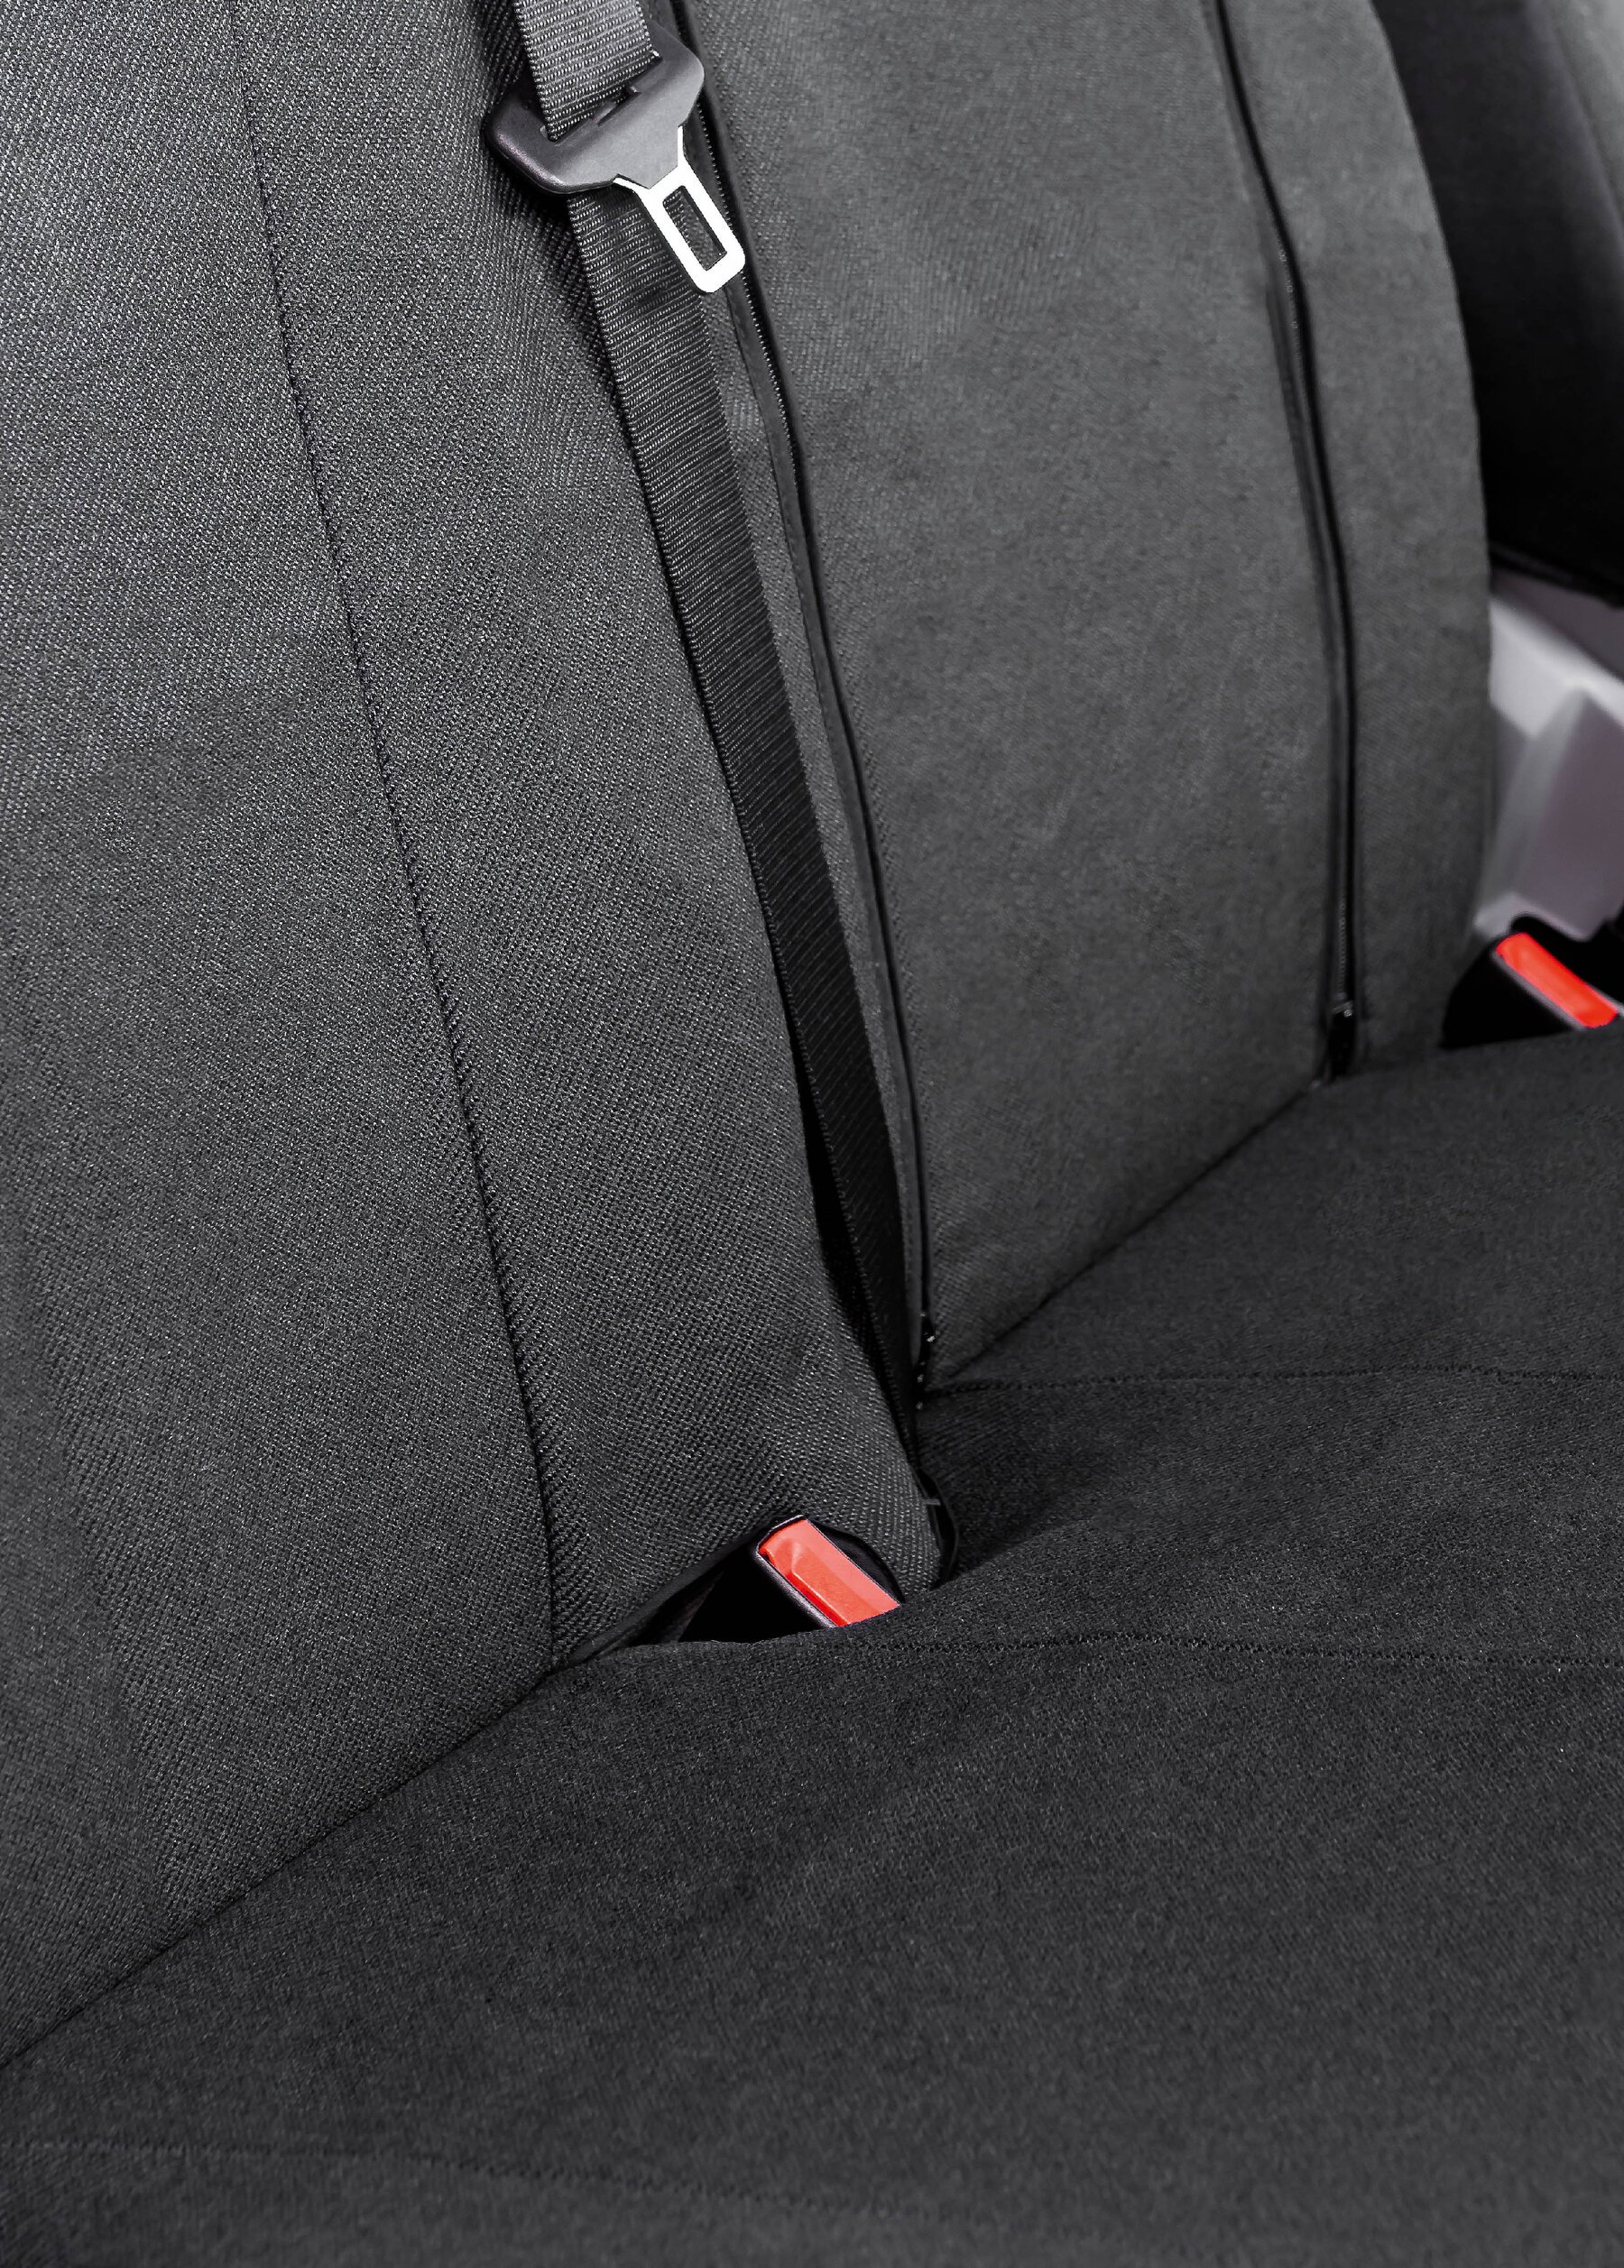 Seat cover made of fabric for Ford Transit, single seat cover, double seat cover